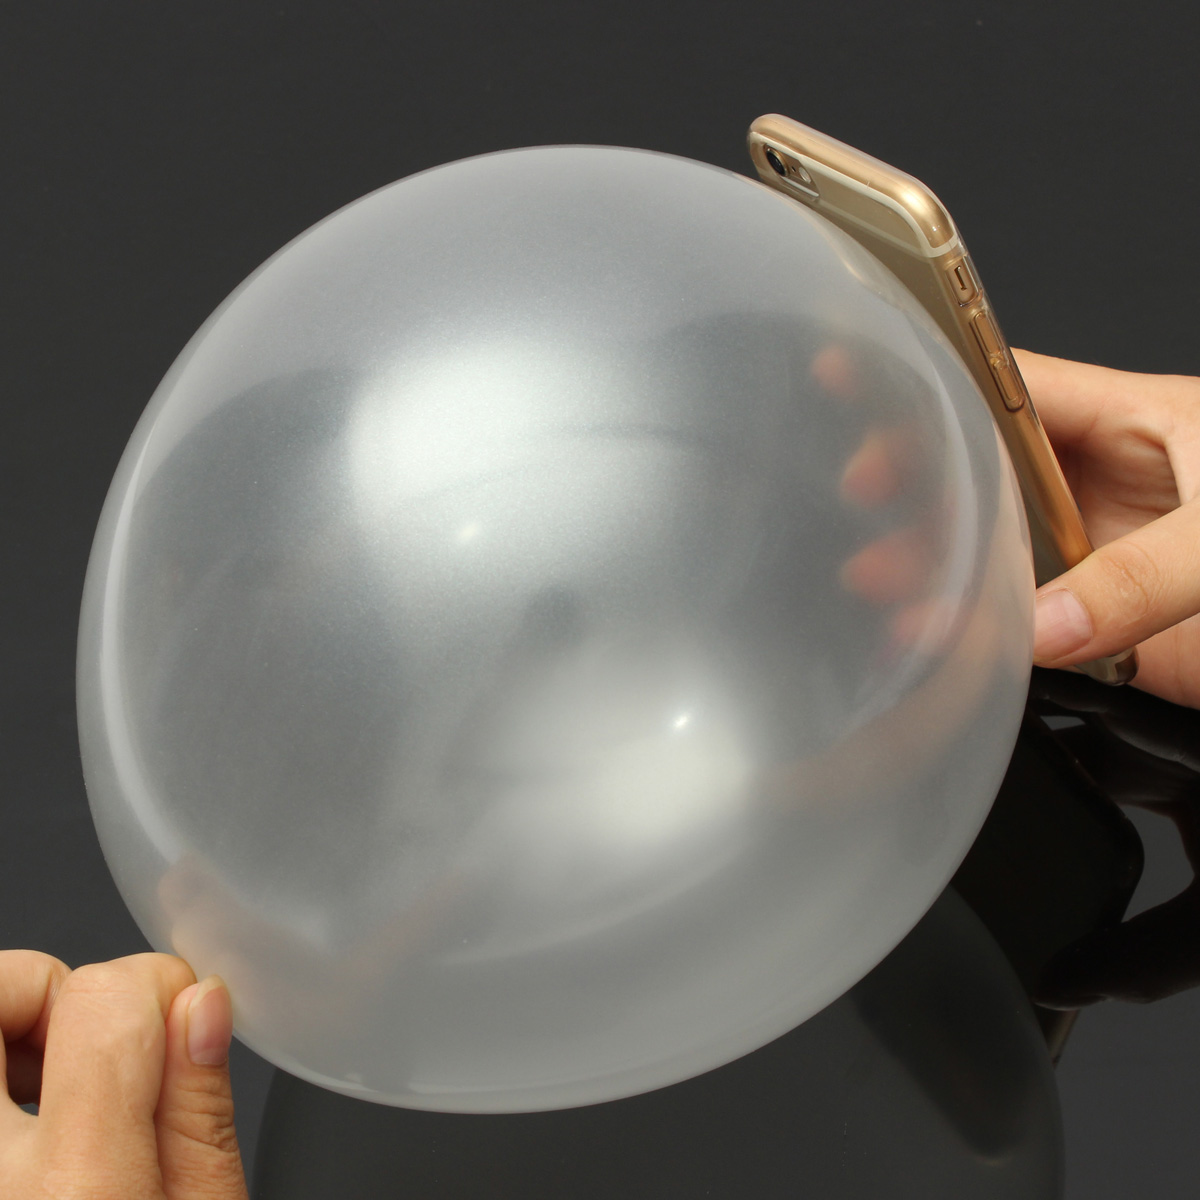 5Pcs-Close-Up-Magic-Street-Trick-Mobile-Into-Balloon-Penetration-In-A-Flash-Party-Fools-Day-Props-To-1442070-1